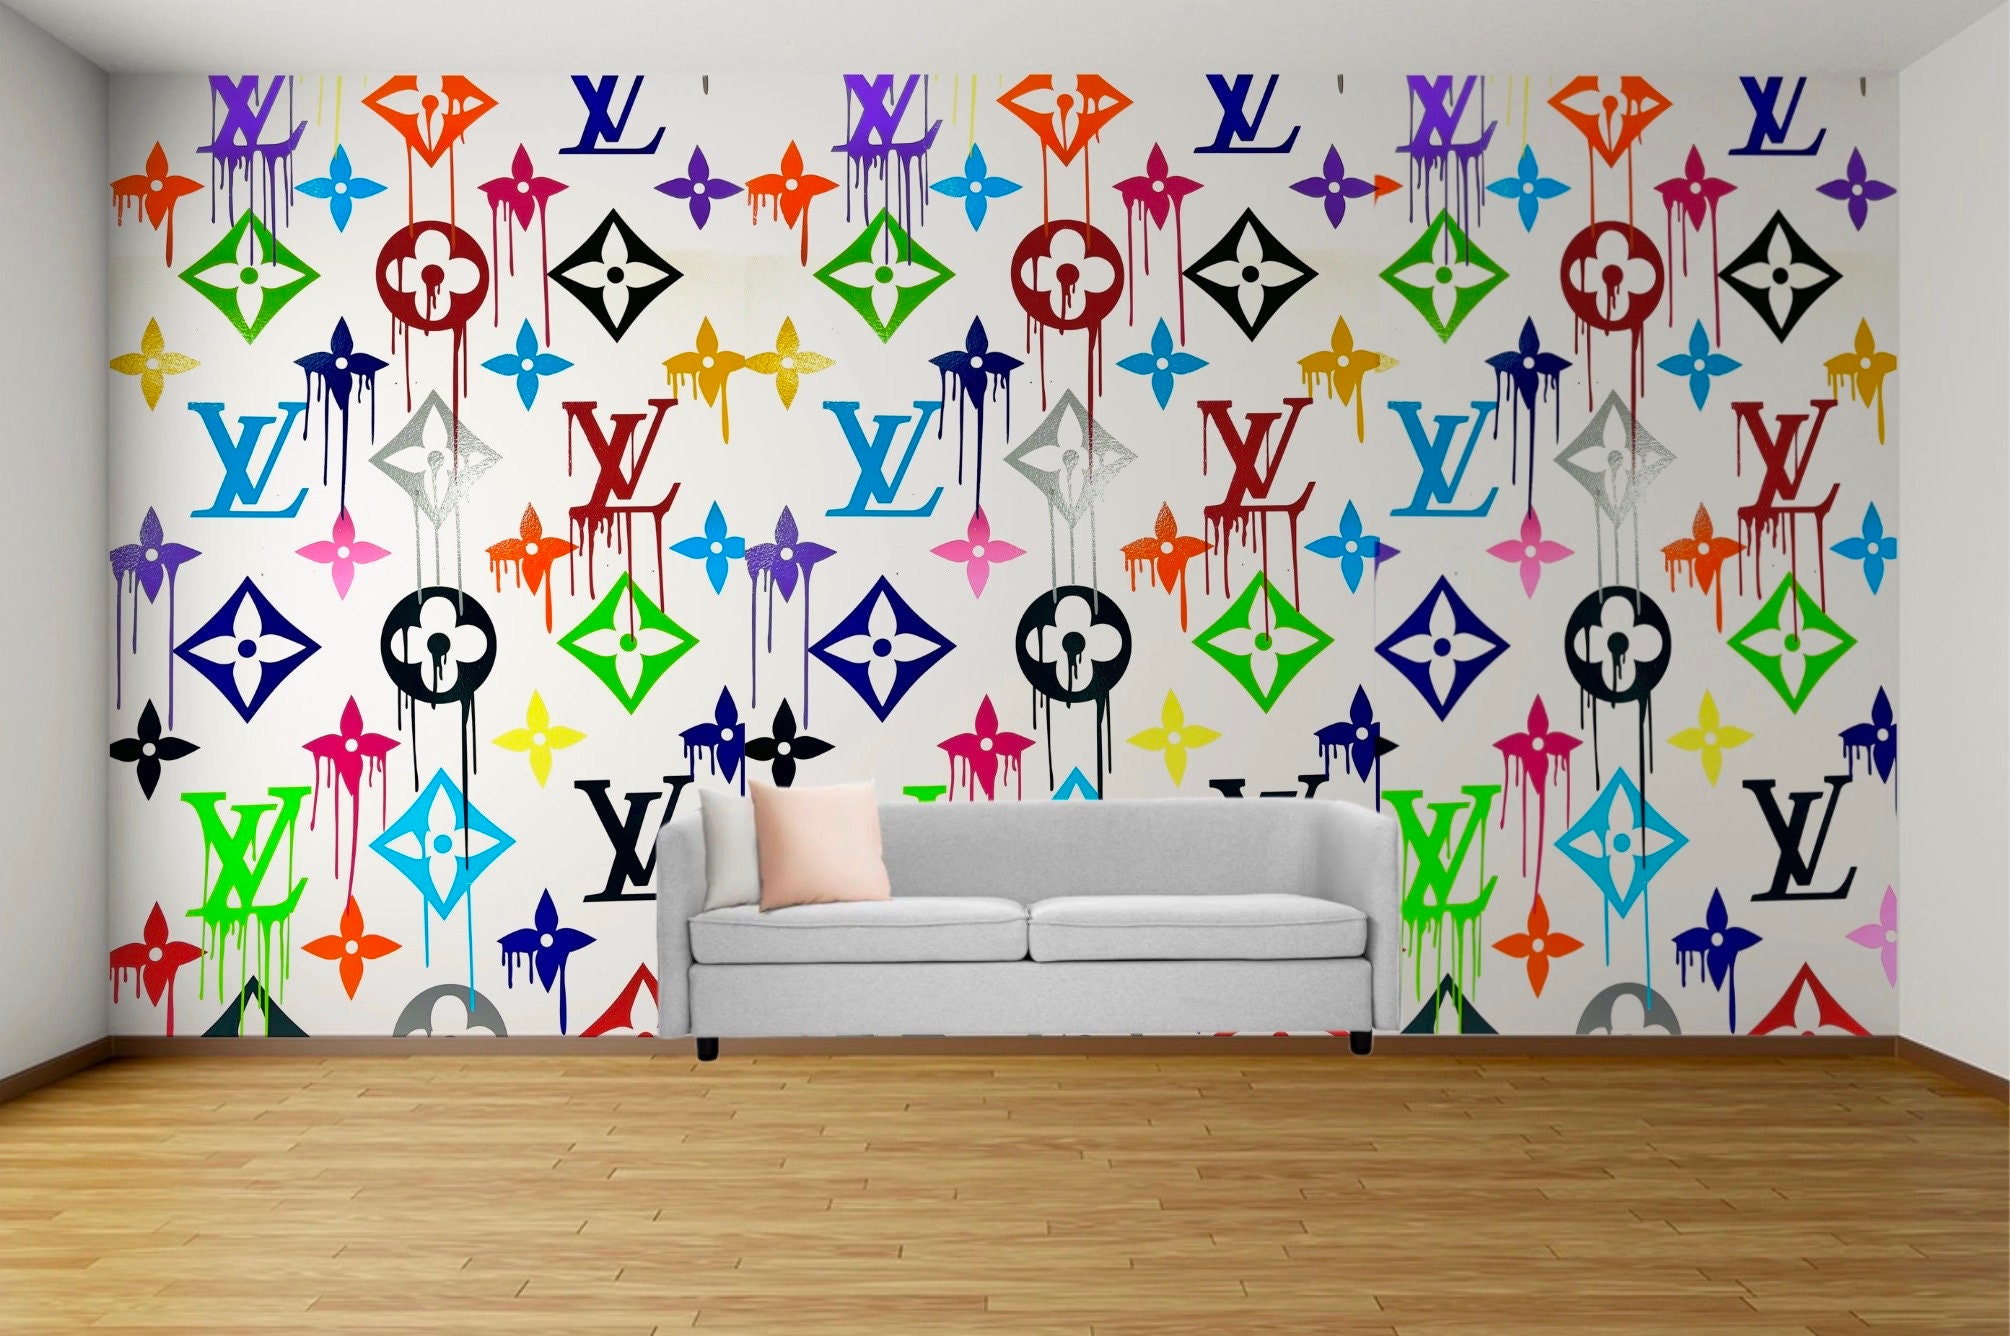 louis vuitton wall stickers